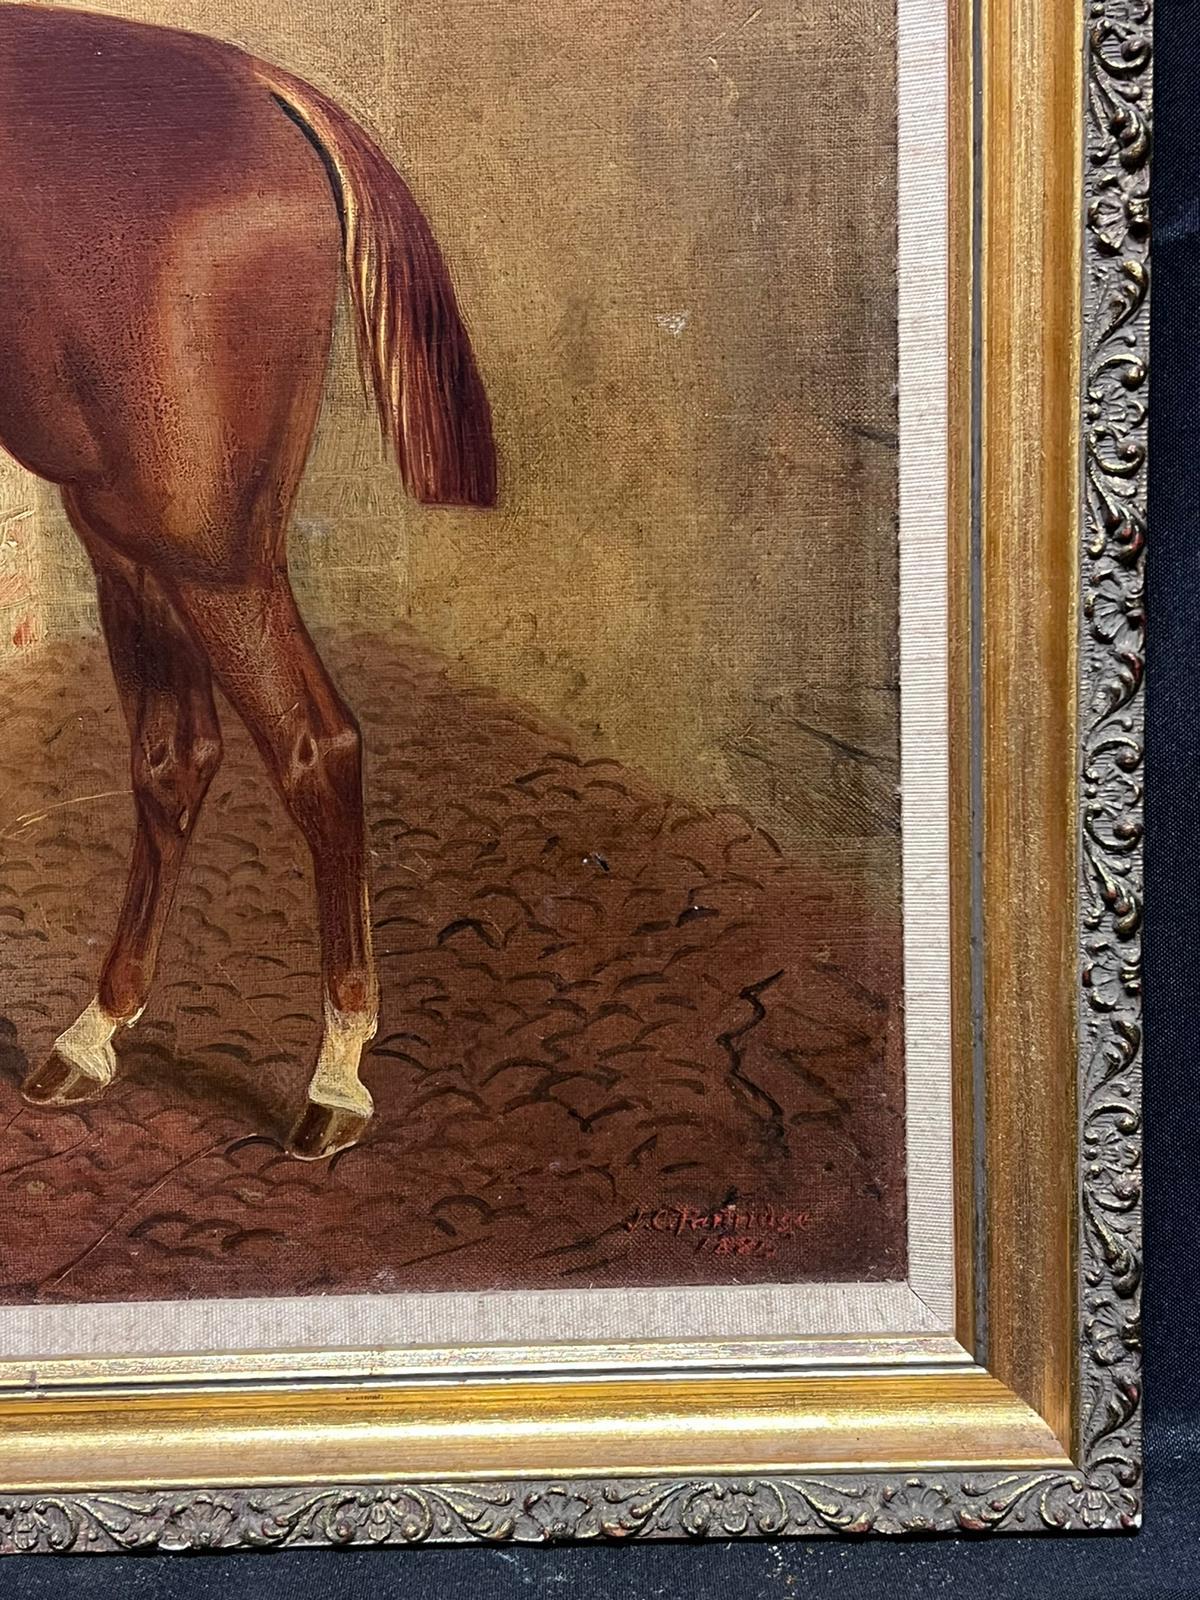 Fine 19th Century British Sporting Art Oil Painting Horse in Stable Interior For Sale 9